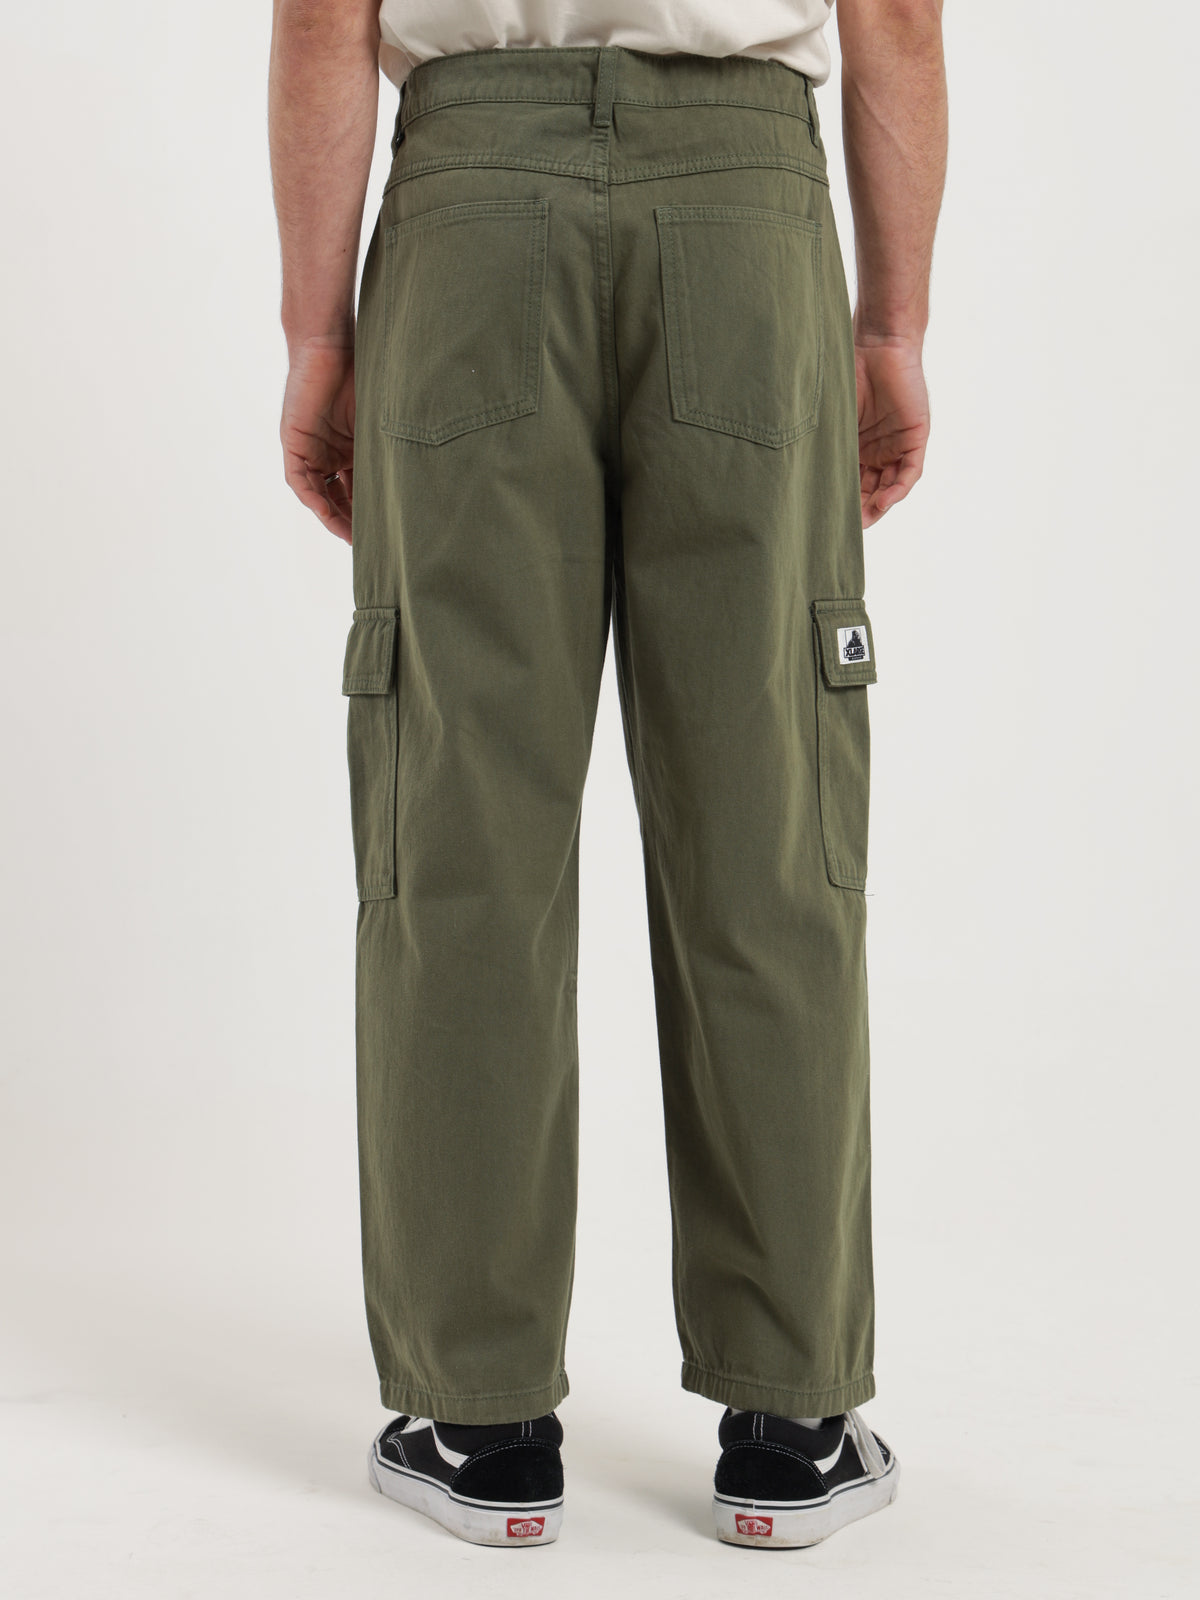 91 Cargo Pants in Military